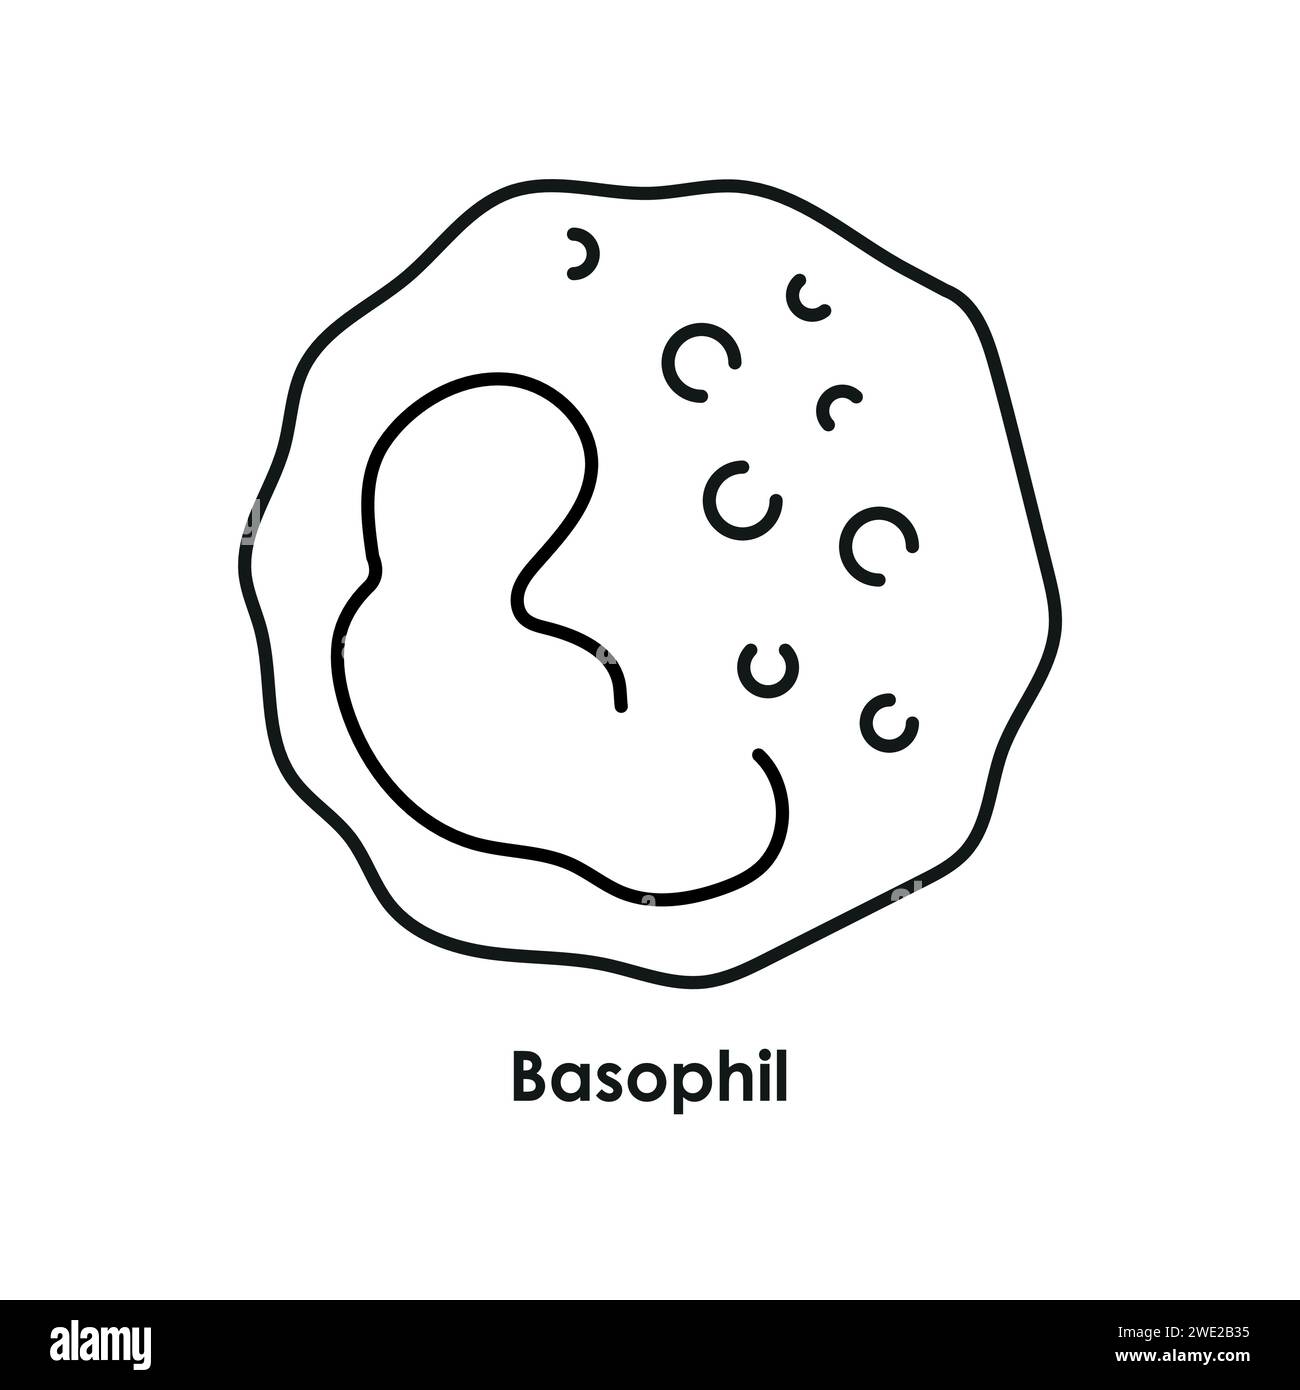 Basophil color icon. White blood cells in the blood vessels. Vector isolated illustration. Stock Vector